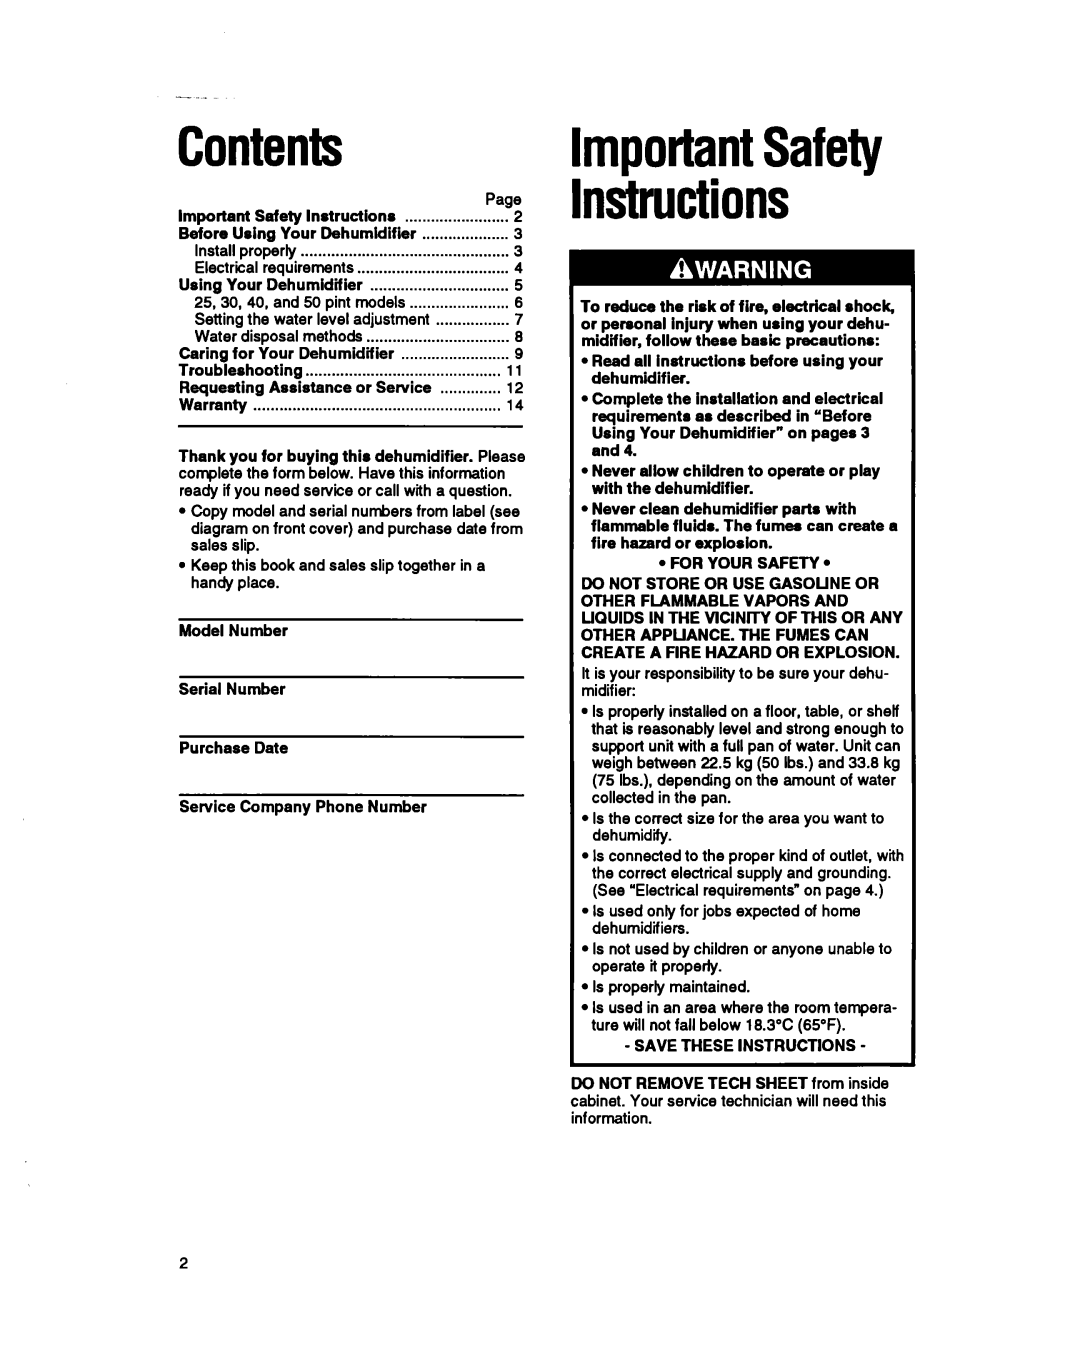 Whirlpool BHDH2500FS0 manual importantSafety instructions, tents 